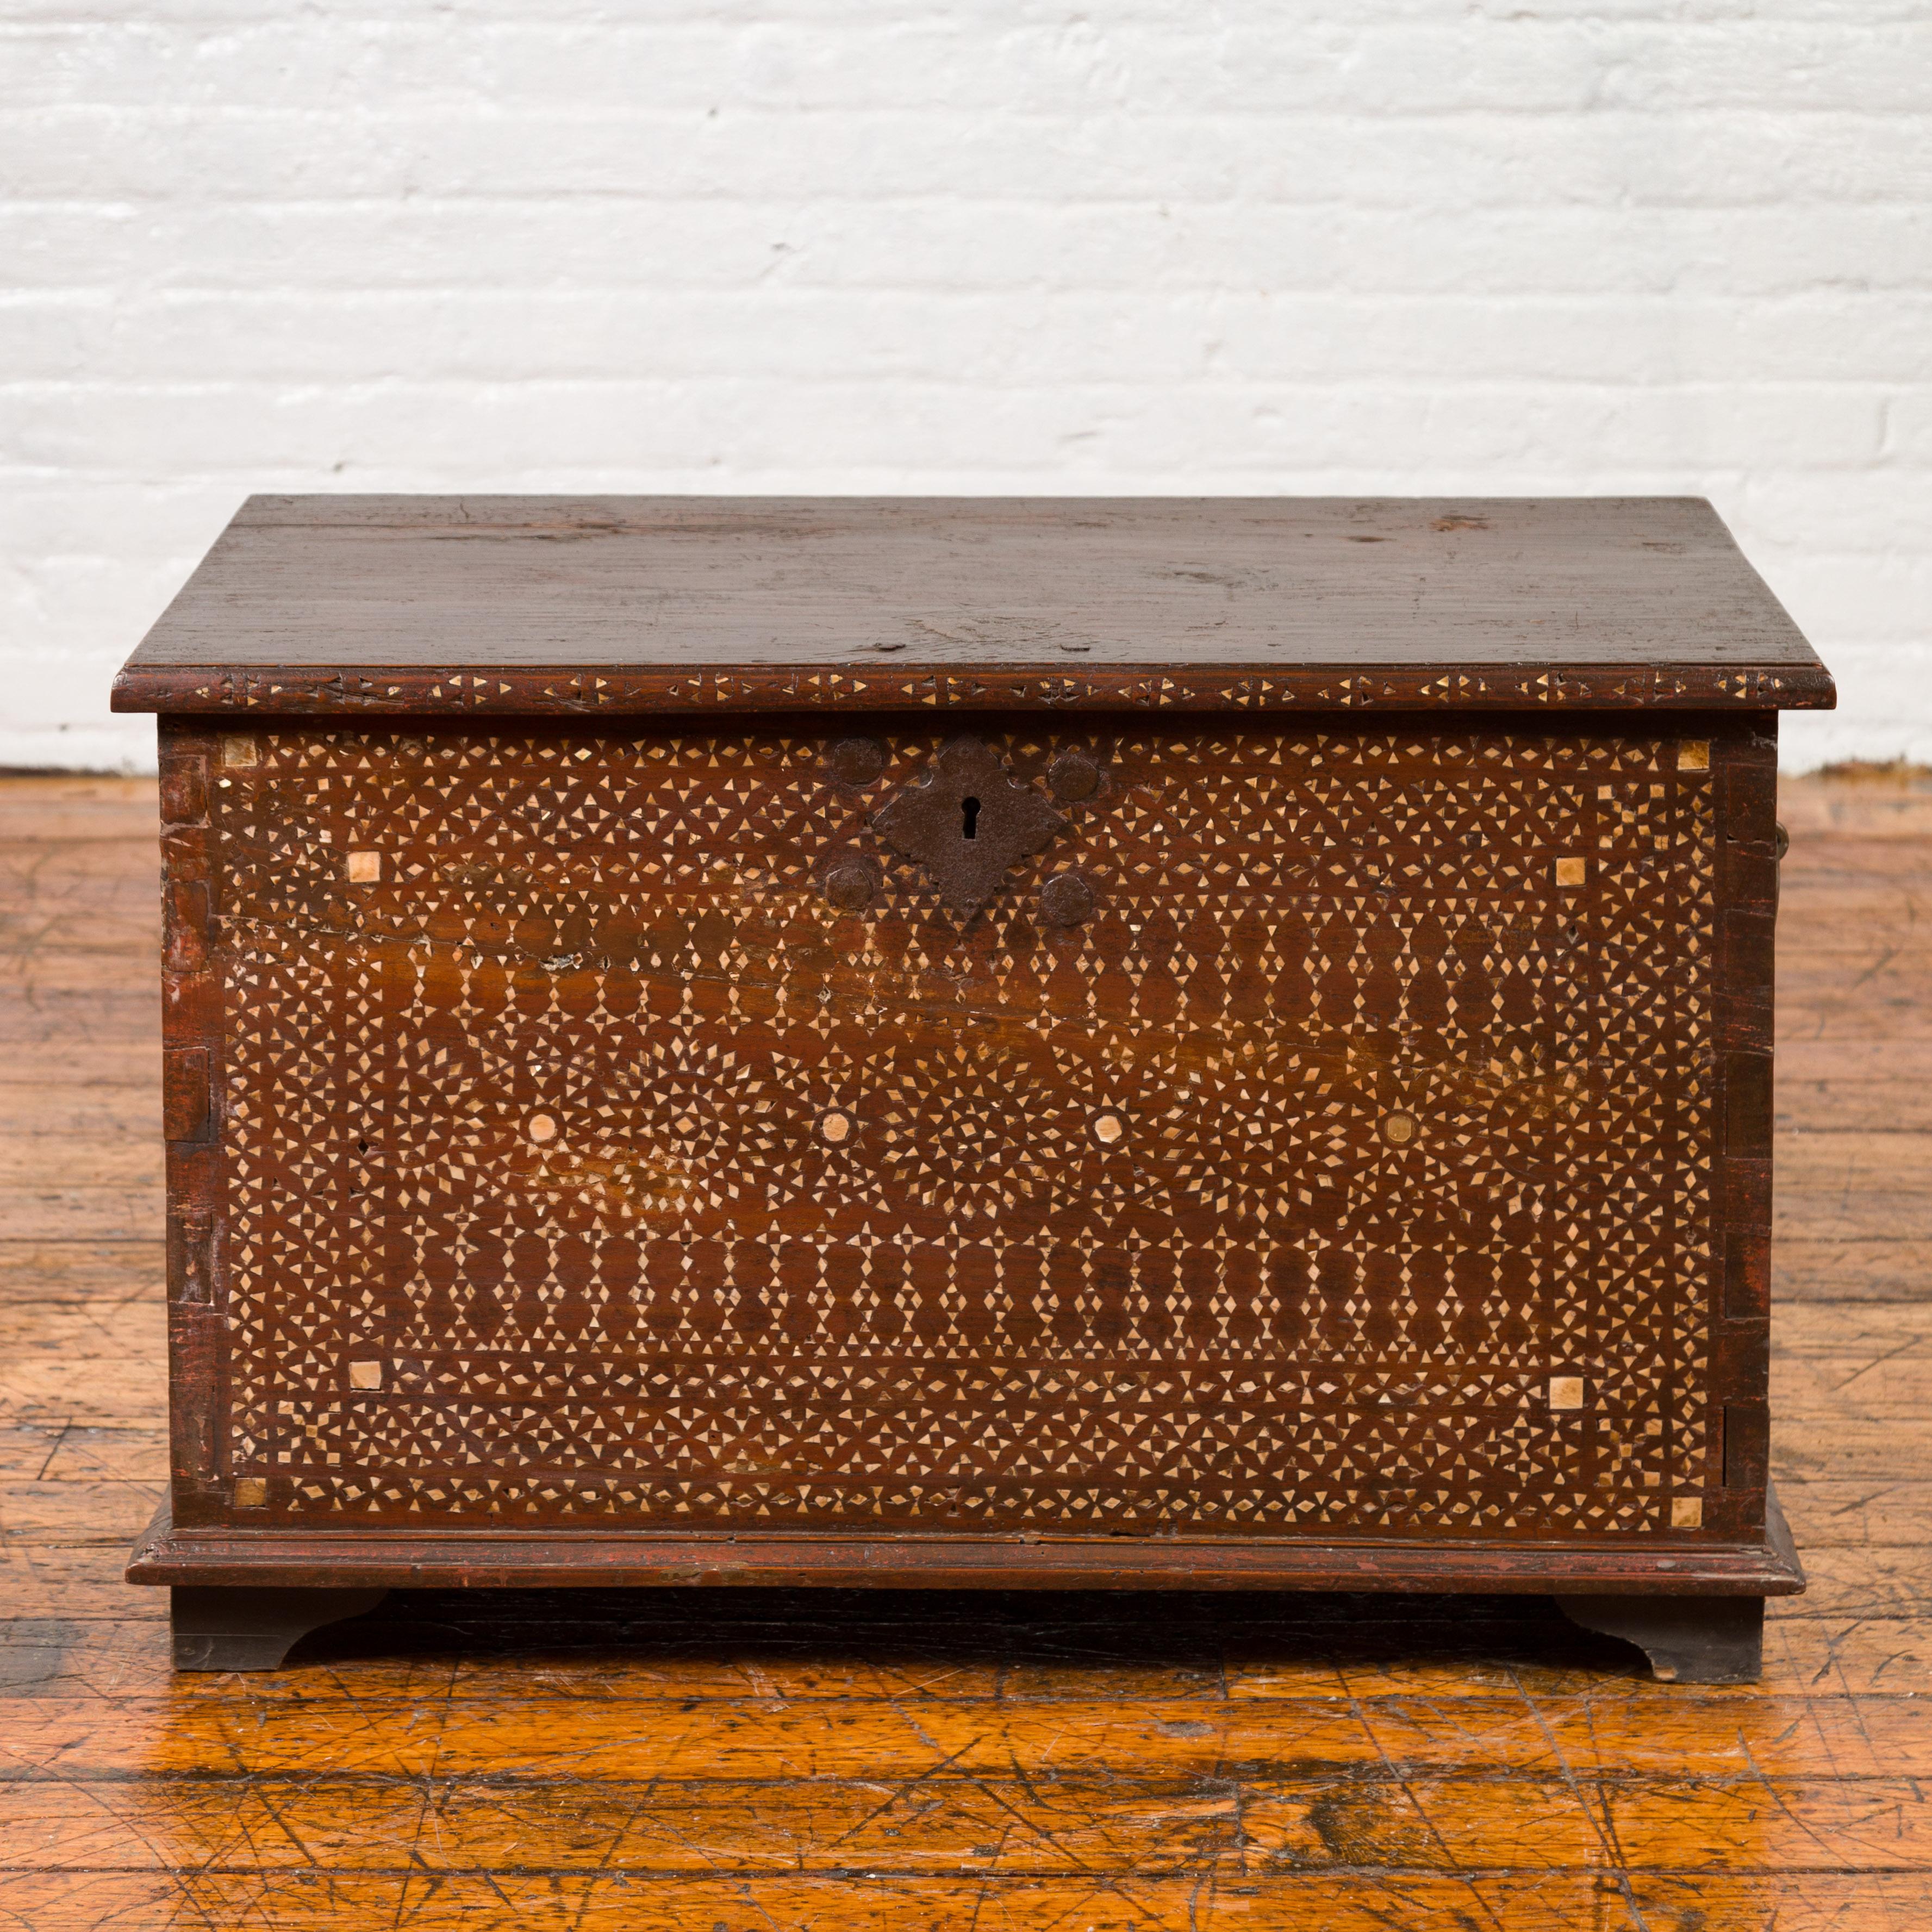 An antique Indonesian wooden blanket chest from the early 20th century, with mother of pearl inlay. Born in Jakarta during the early years of the 20th century, this blanket chest draws our attention with its rich geometrical decor created by lovely